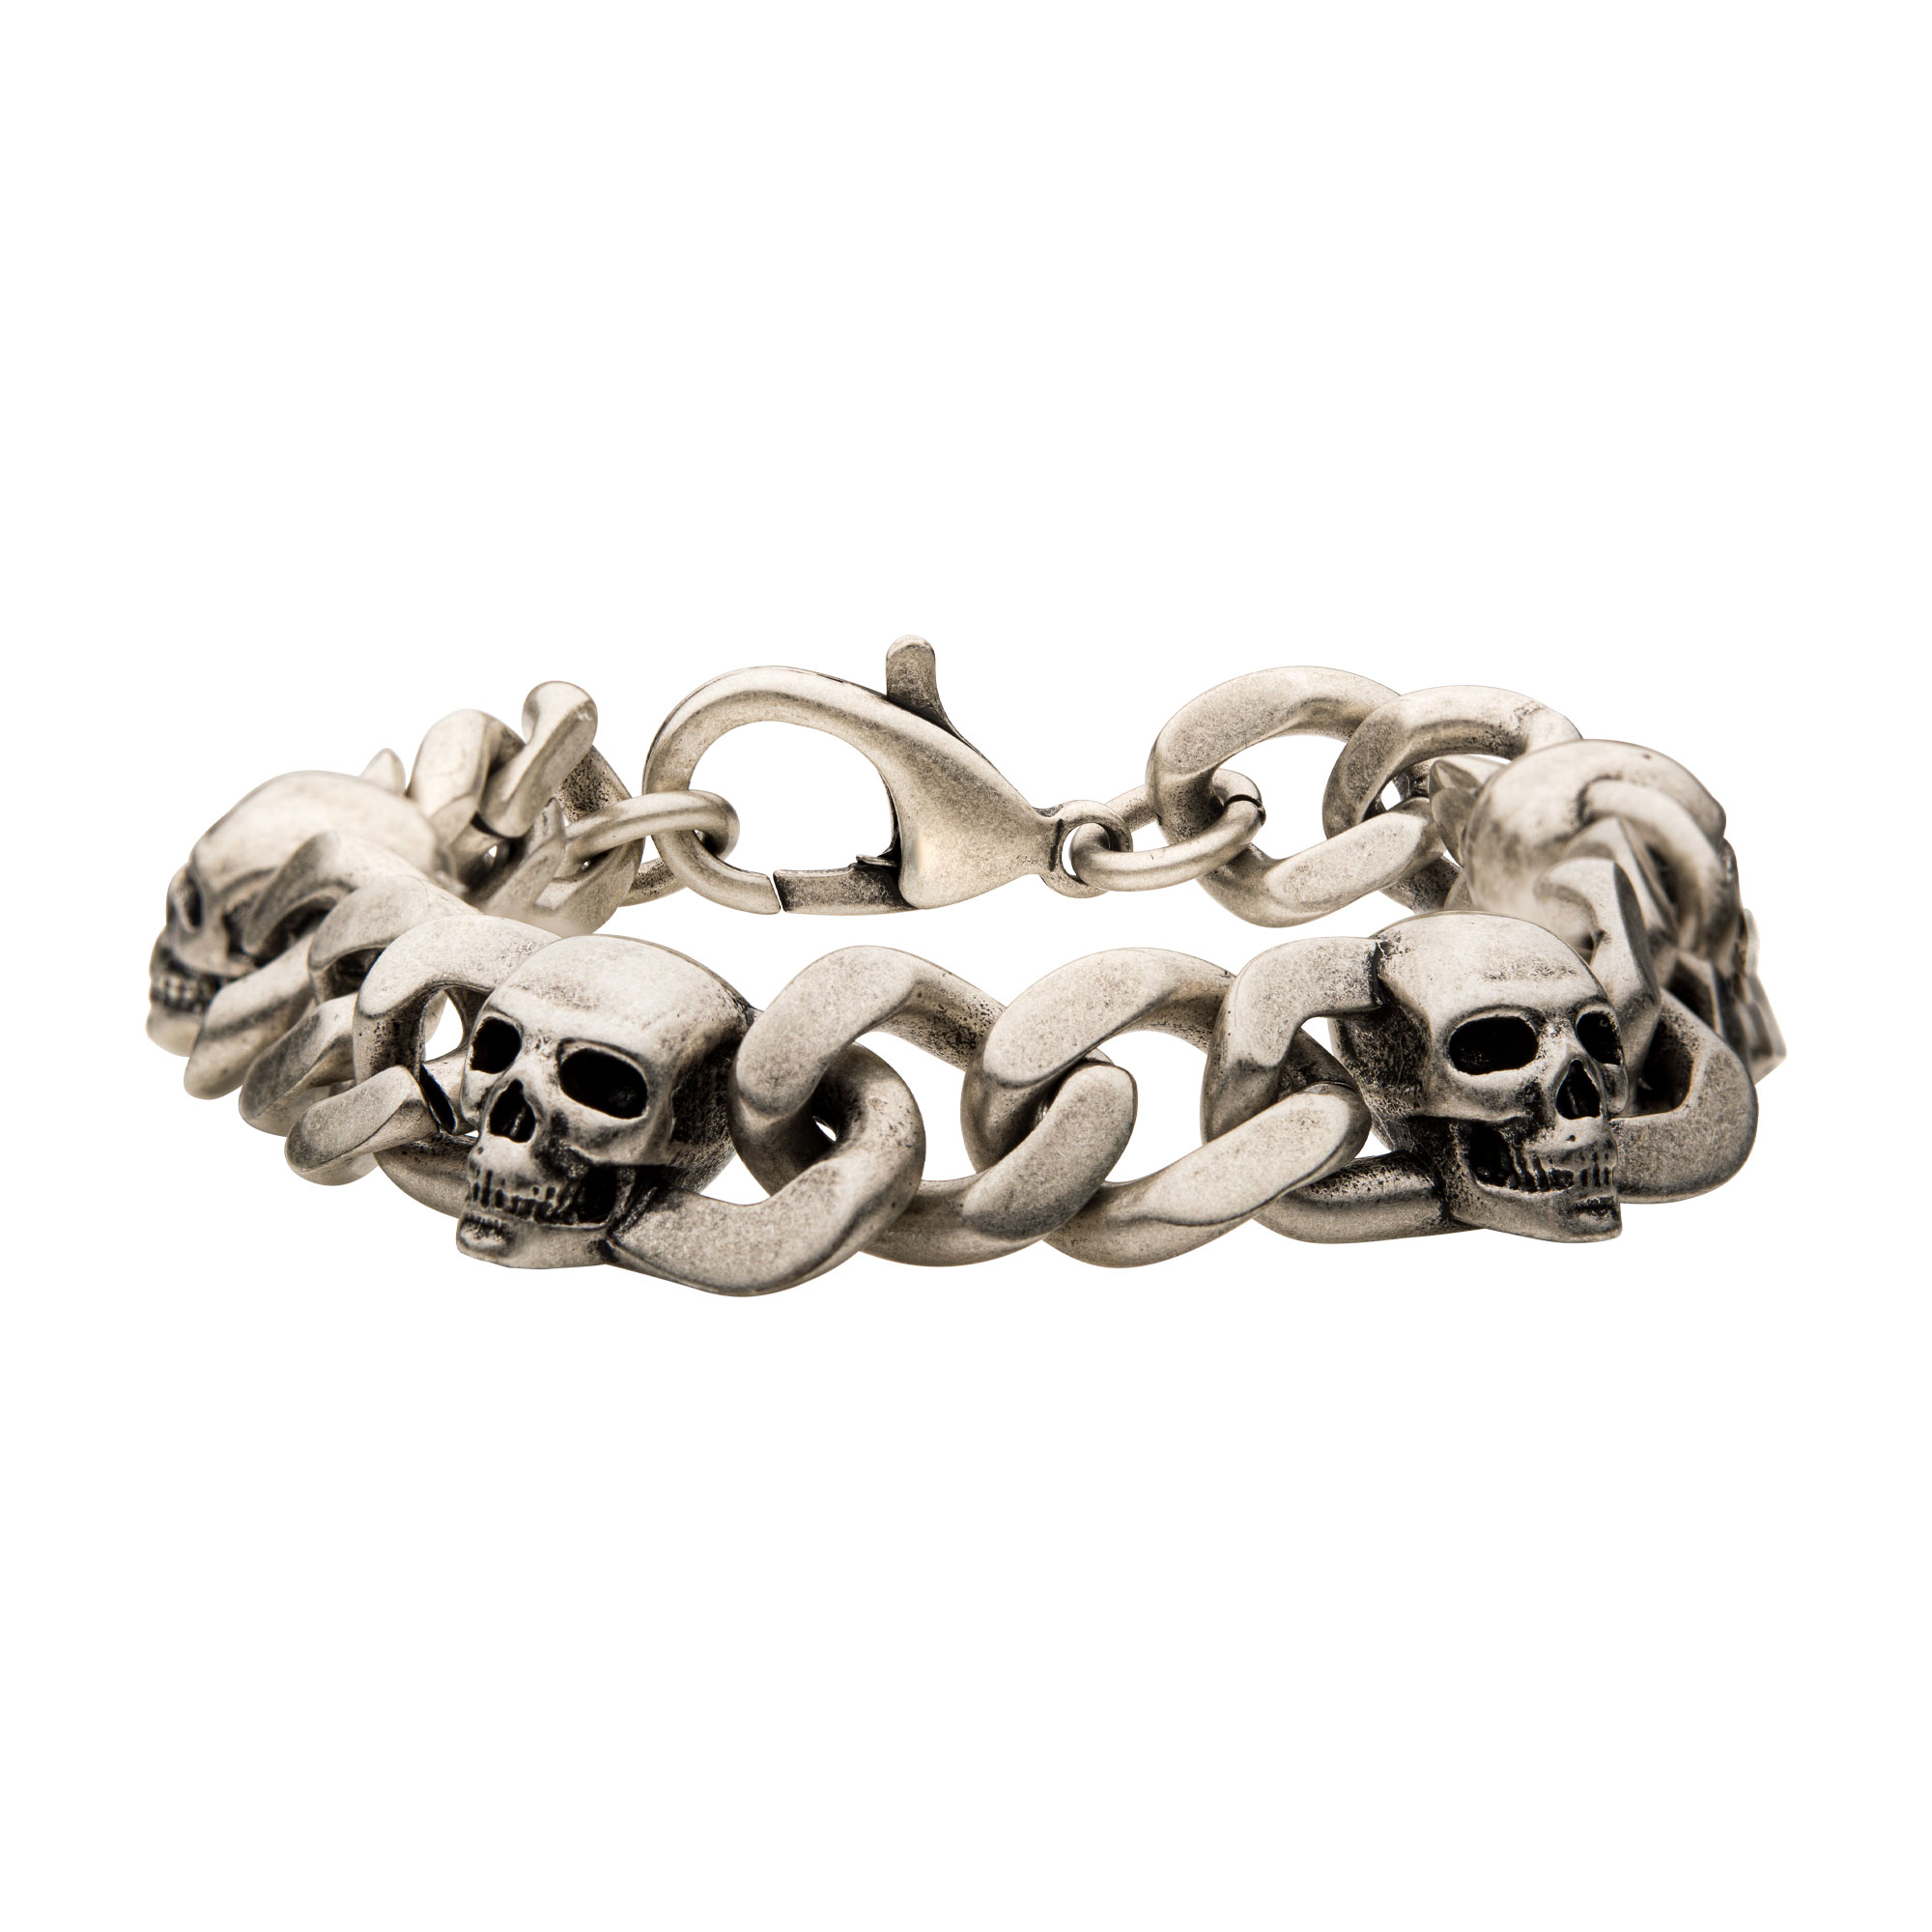 Stainless Steel Silver Plated with Skull Design Chunky Chain Bracelet Ken Walker Jewelers Gig Harbor, WA